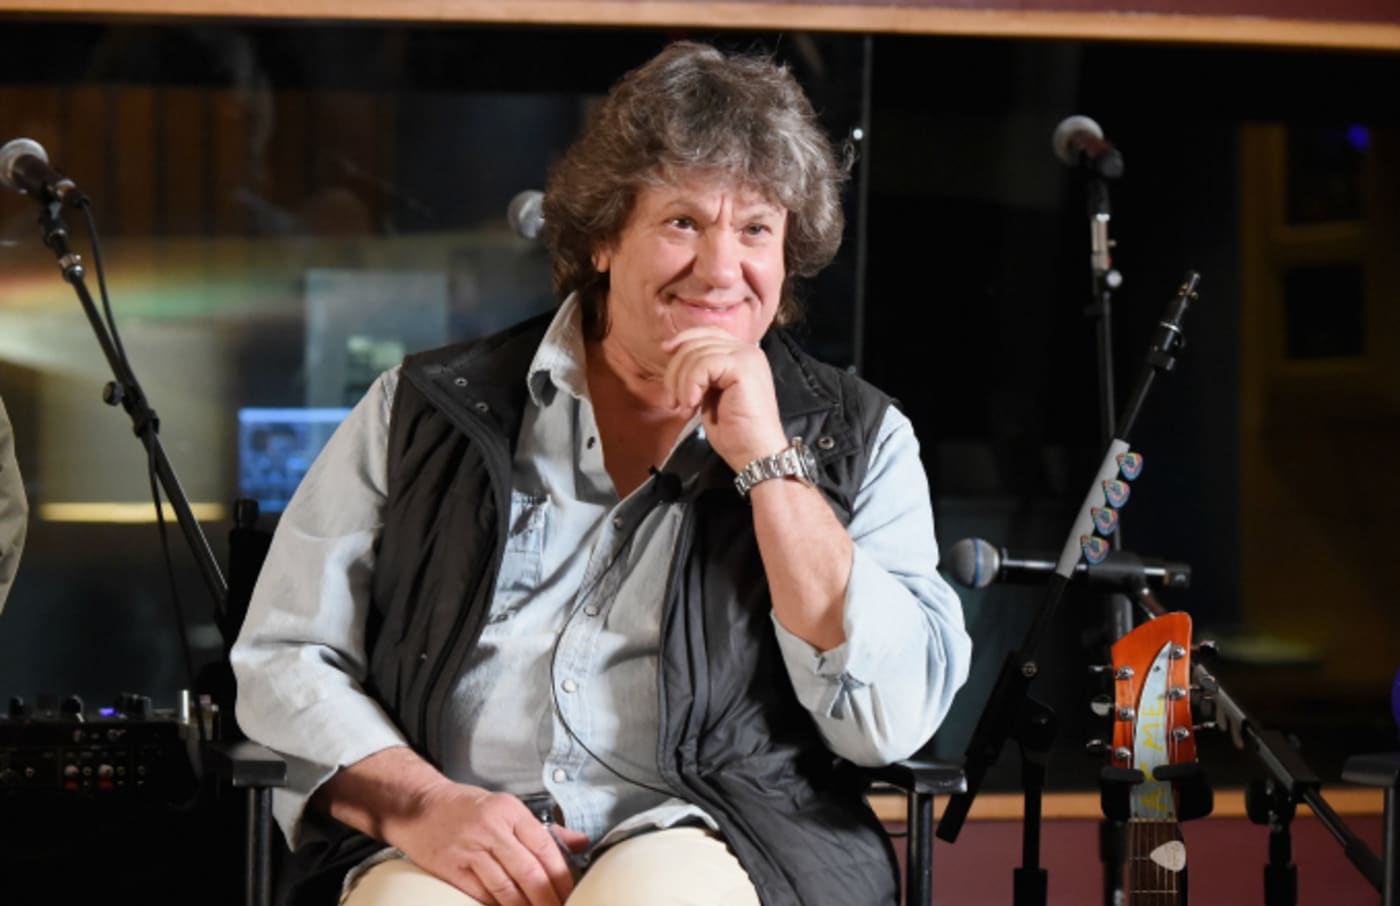 Michael Lang speaks on stage at the announcement of the Woodstock 50 Festival